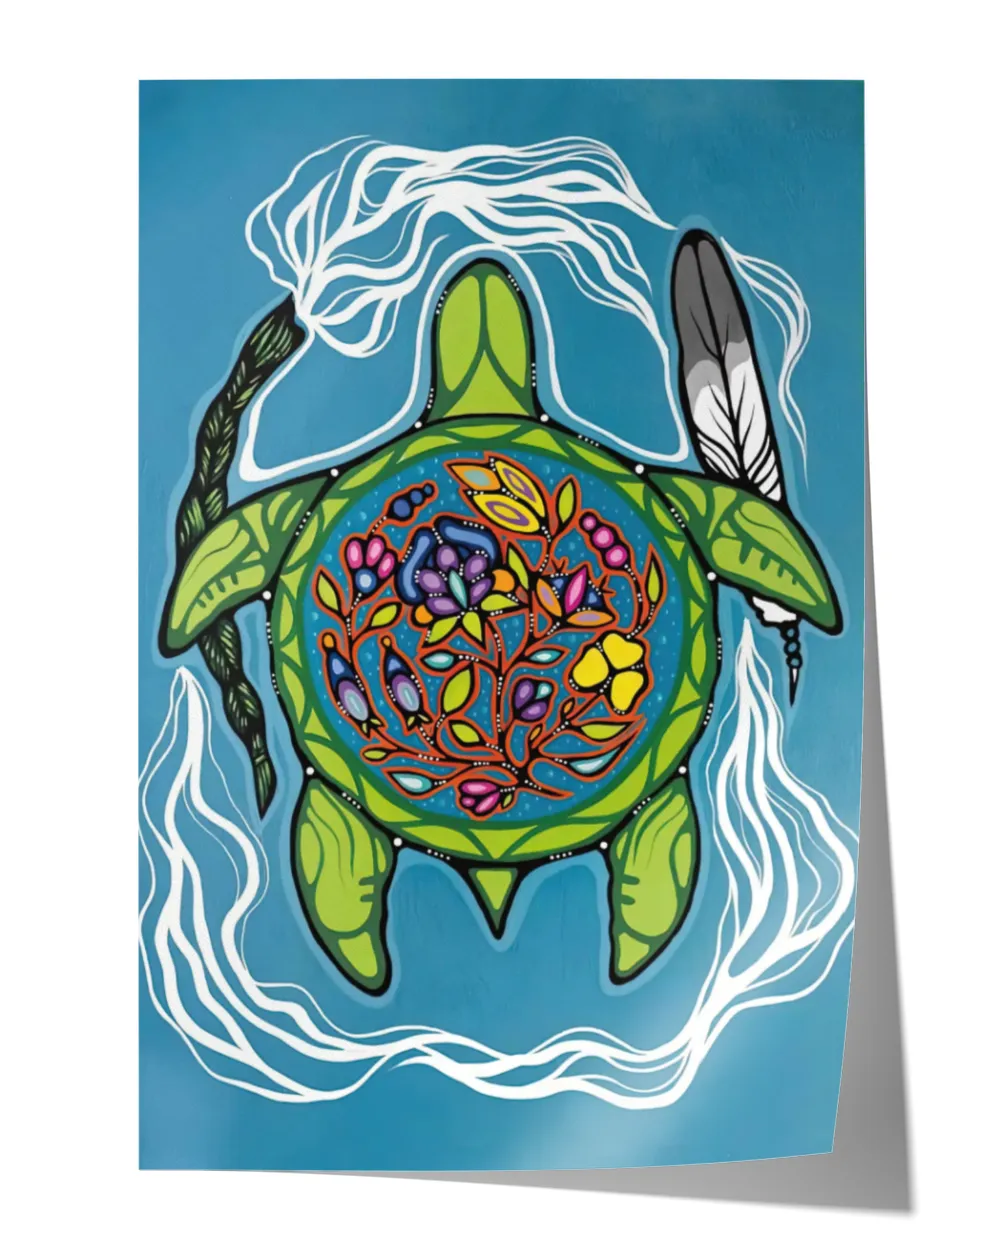 naa-vjv-22 Prayers For Turtle Island by Jackie Traverse